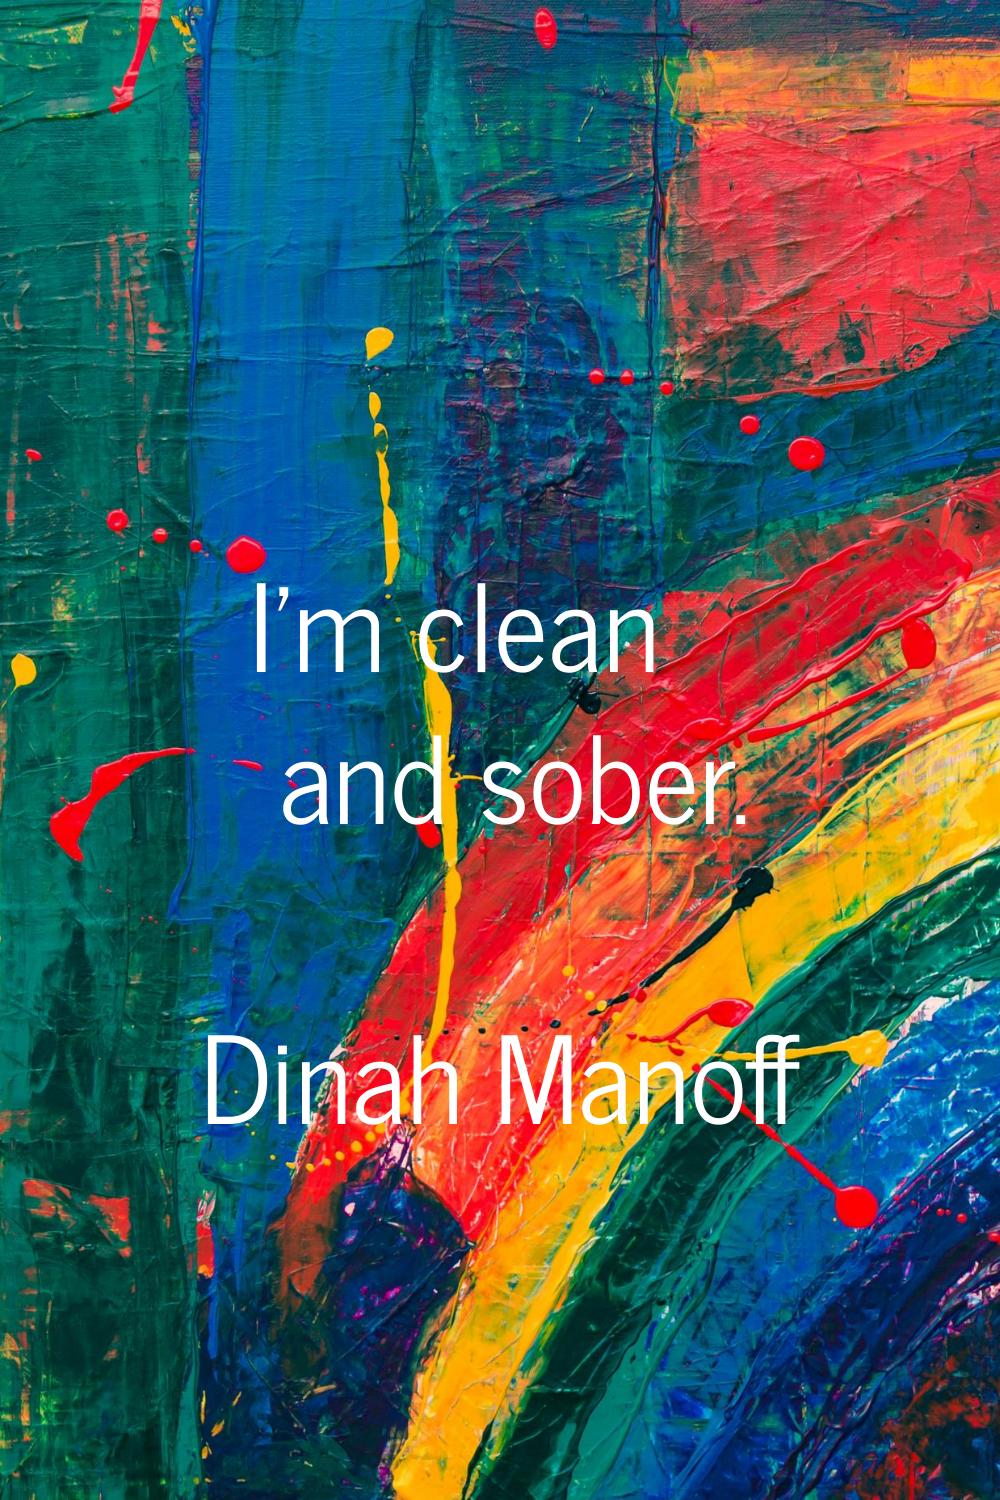 I'm clean and sober.